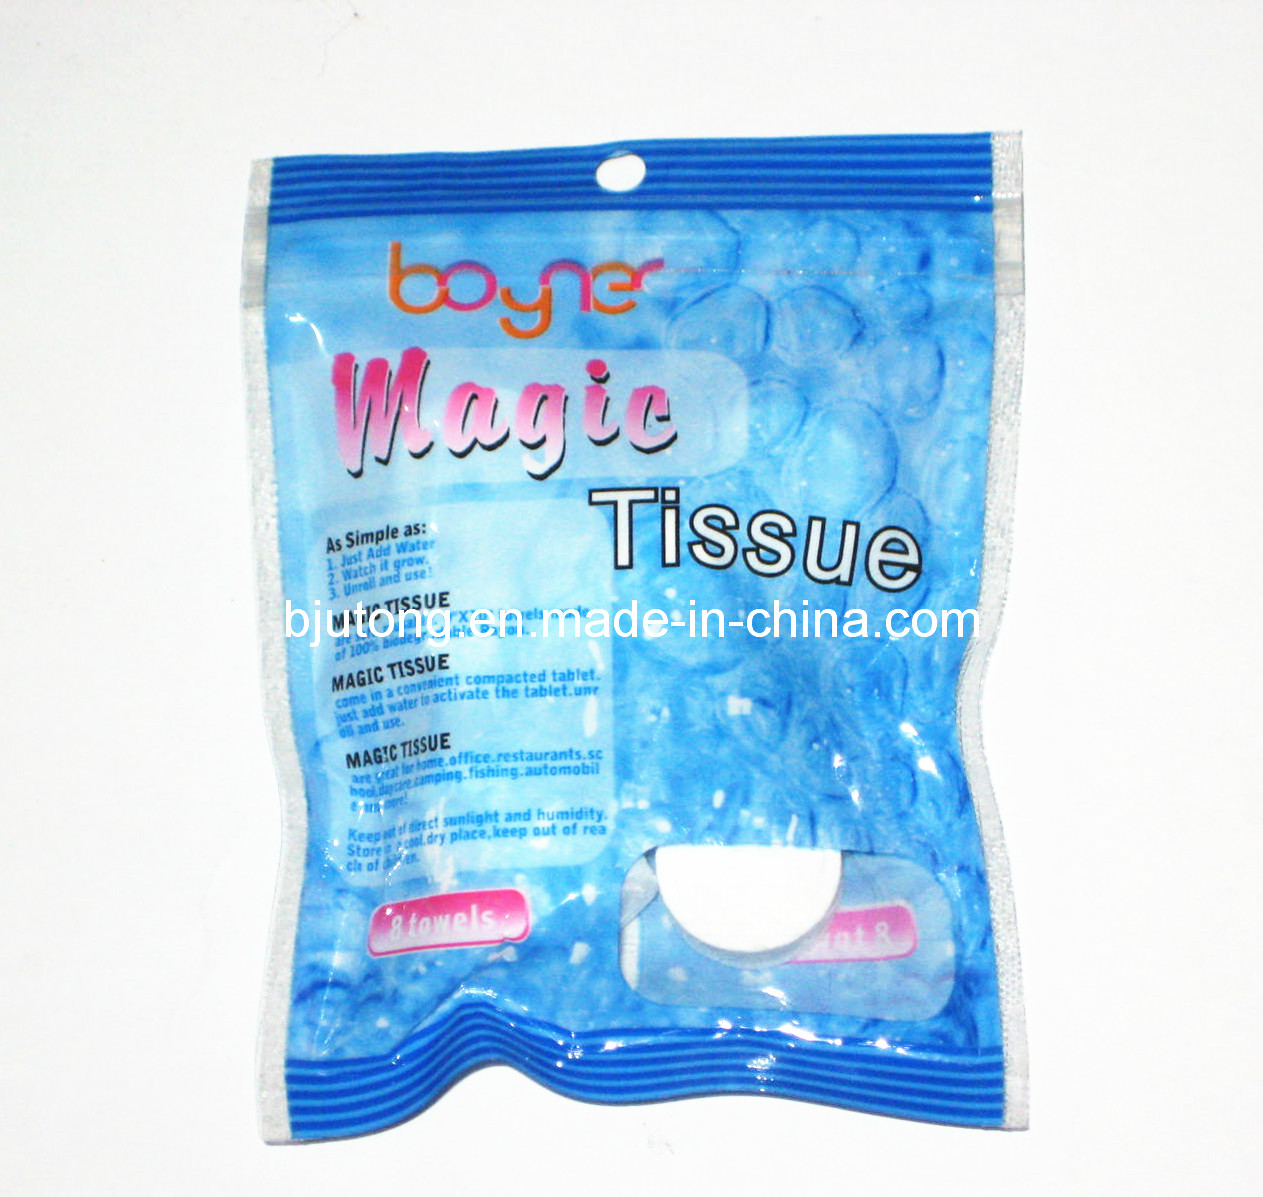 Coin Tissues in Color Bag Packing with OEM Design (YT-711)